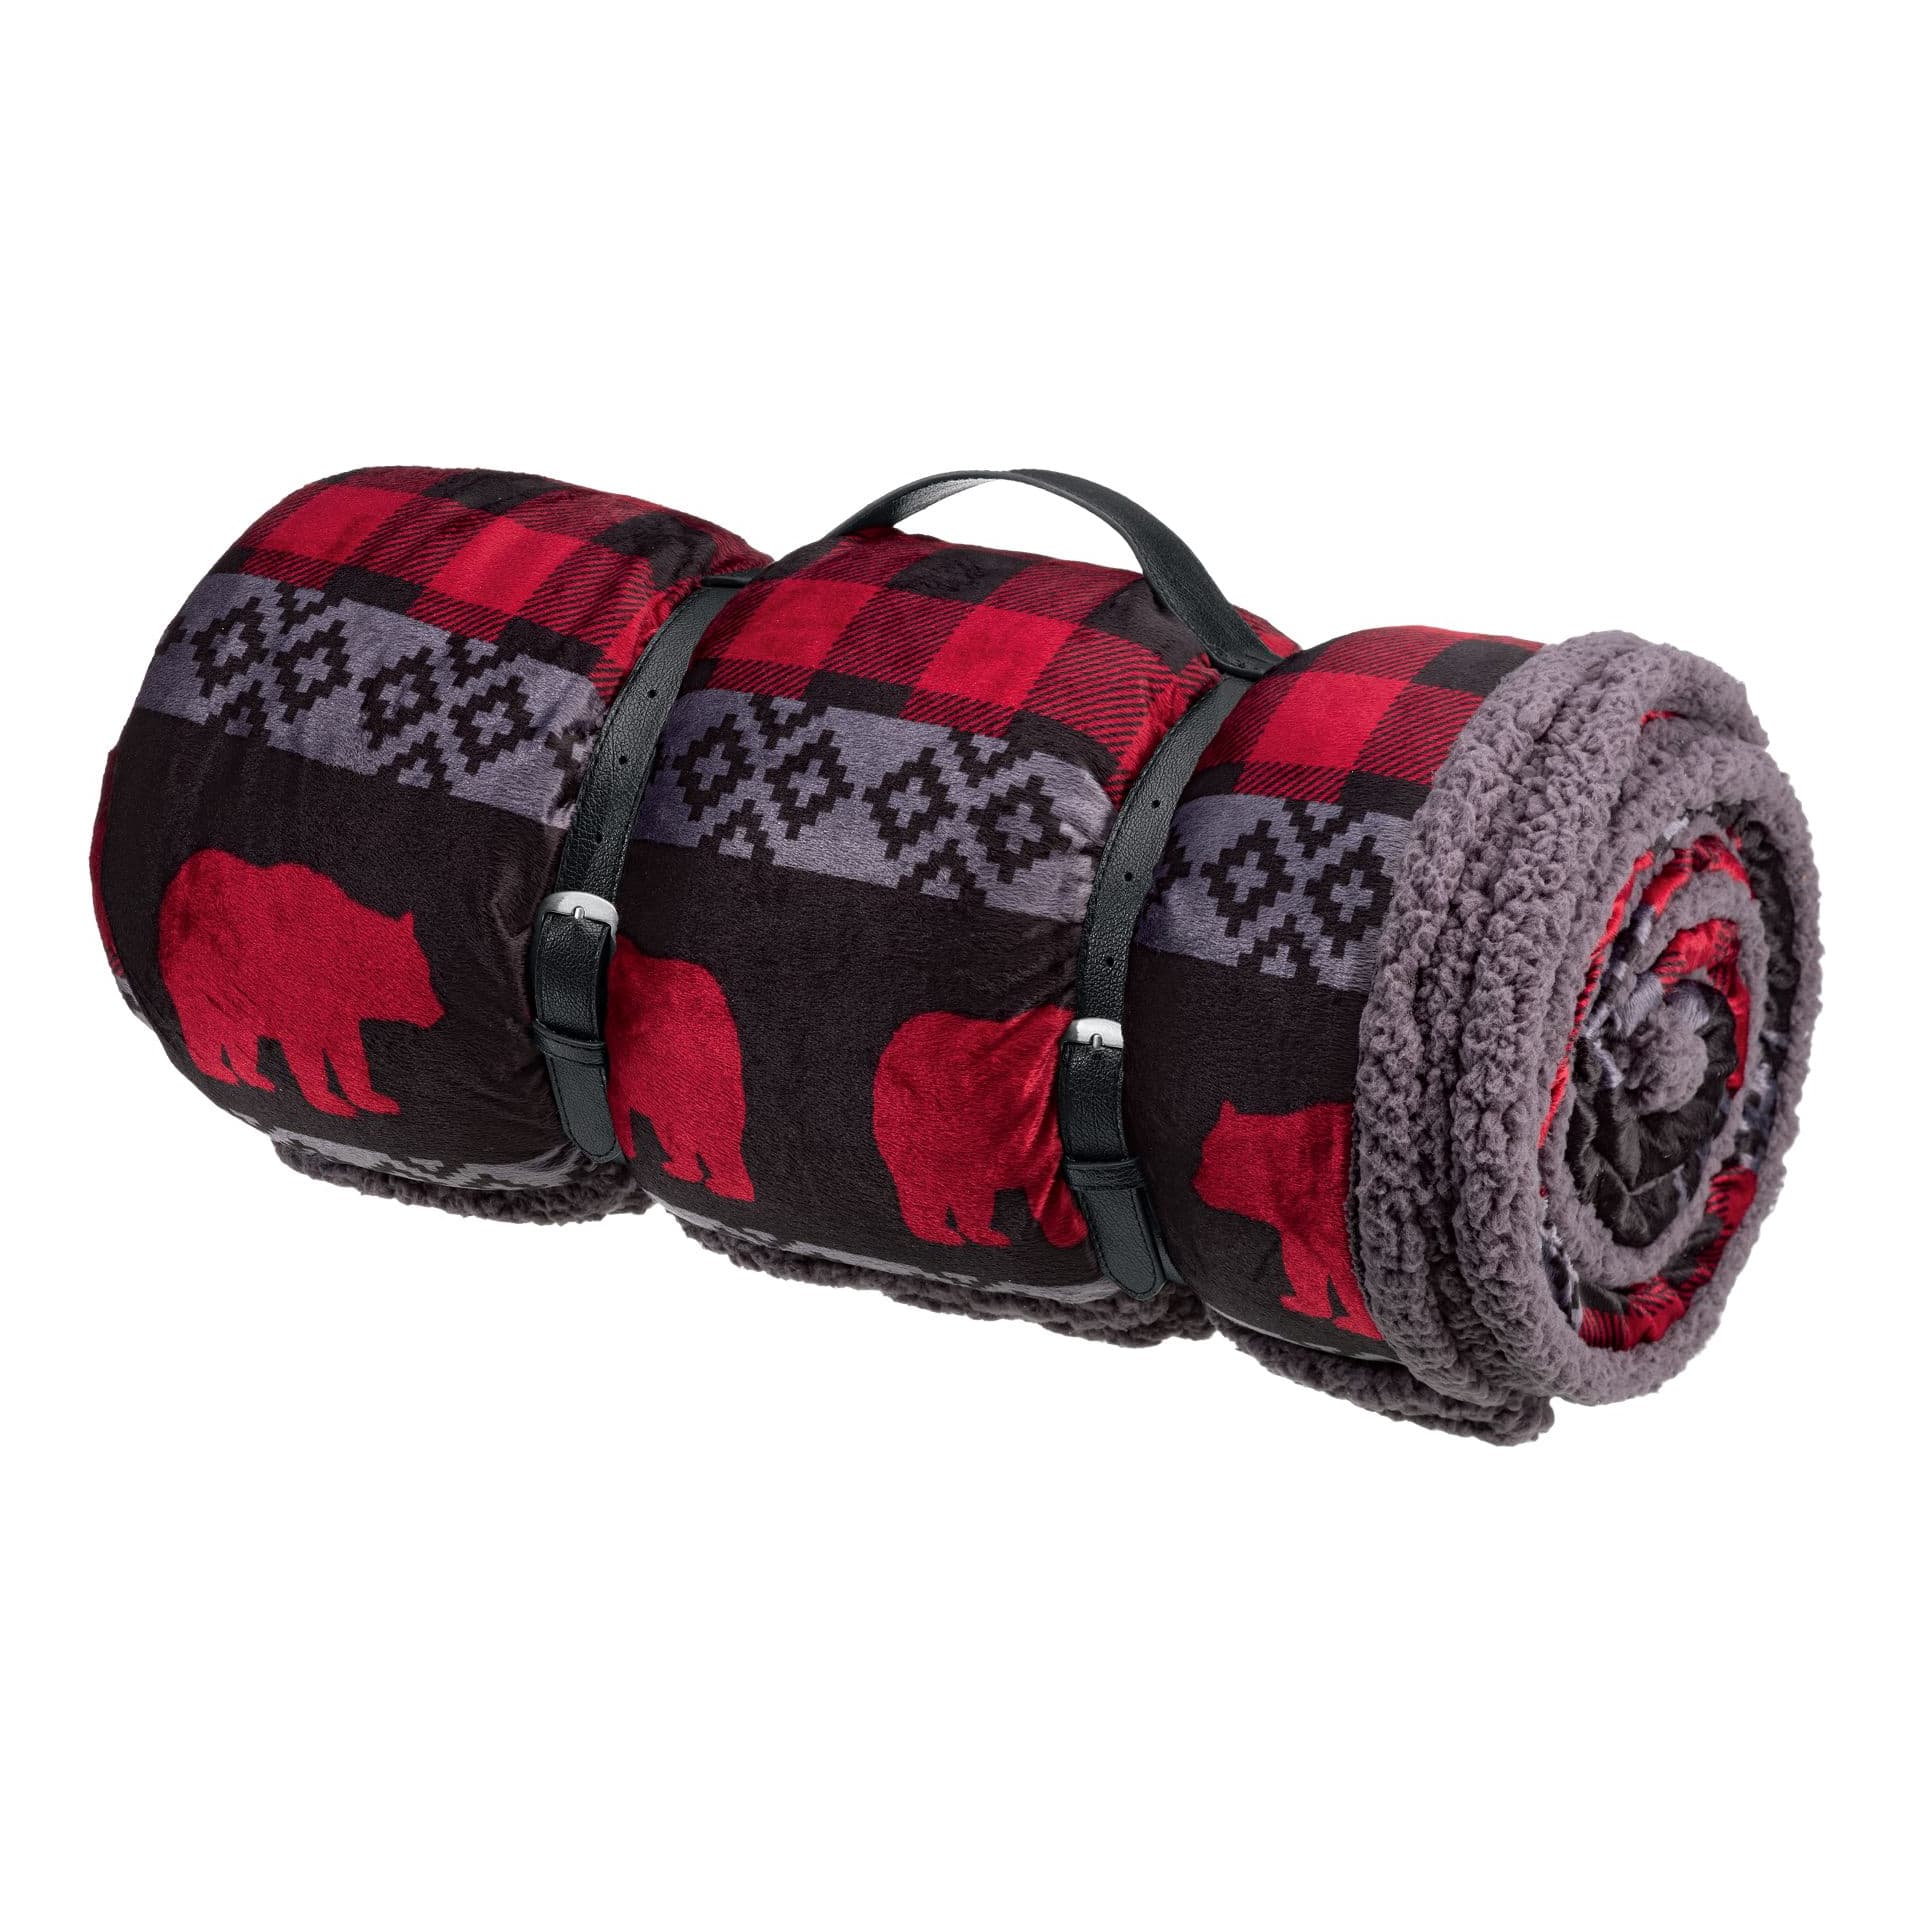 White River® Giant Berber Throw - Moose Plaid - Rolled Up